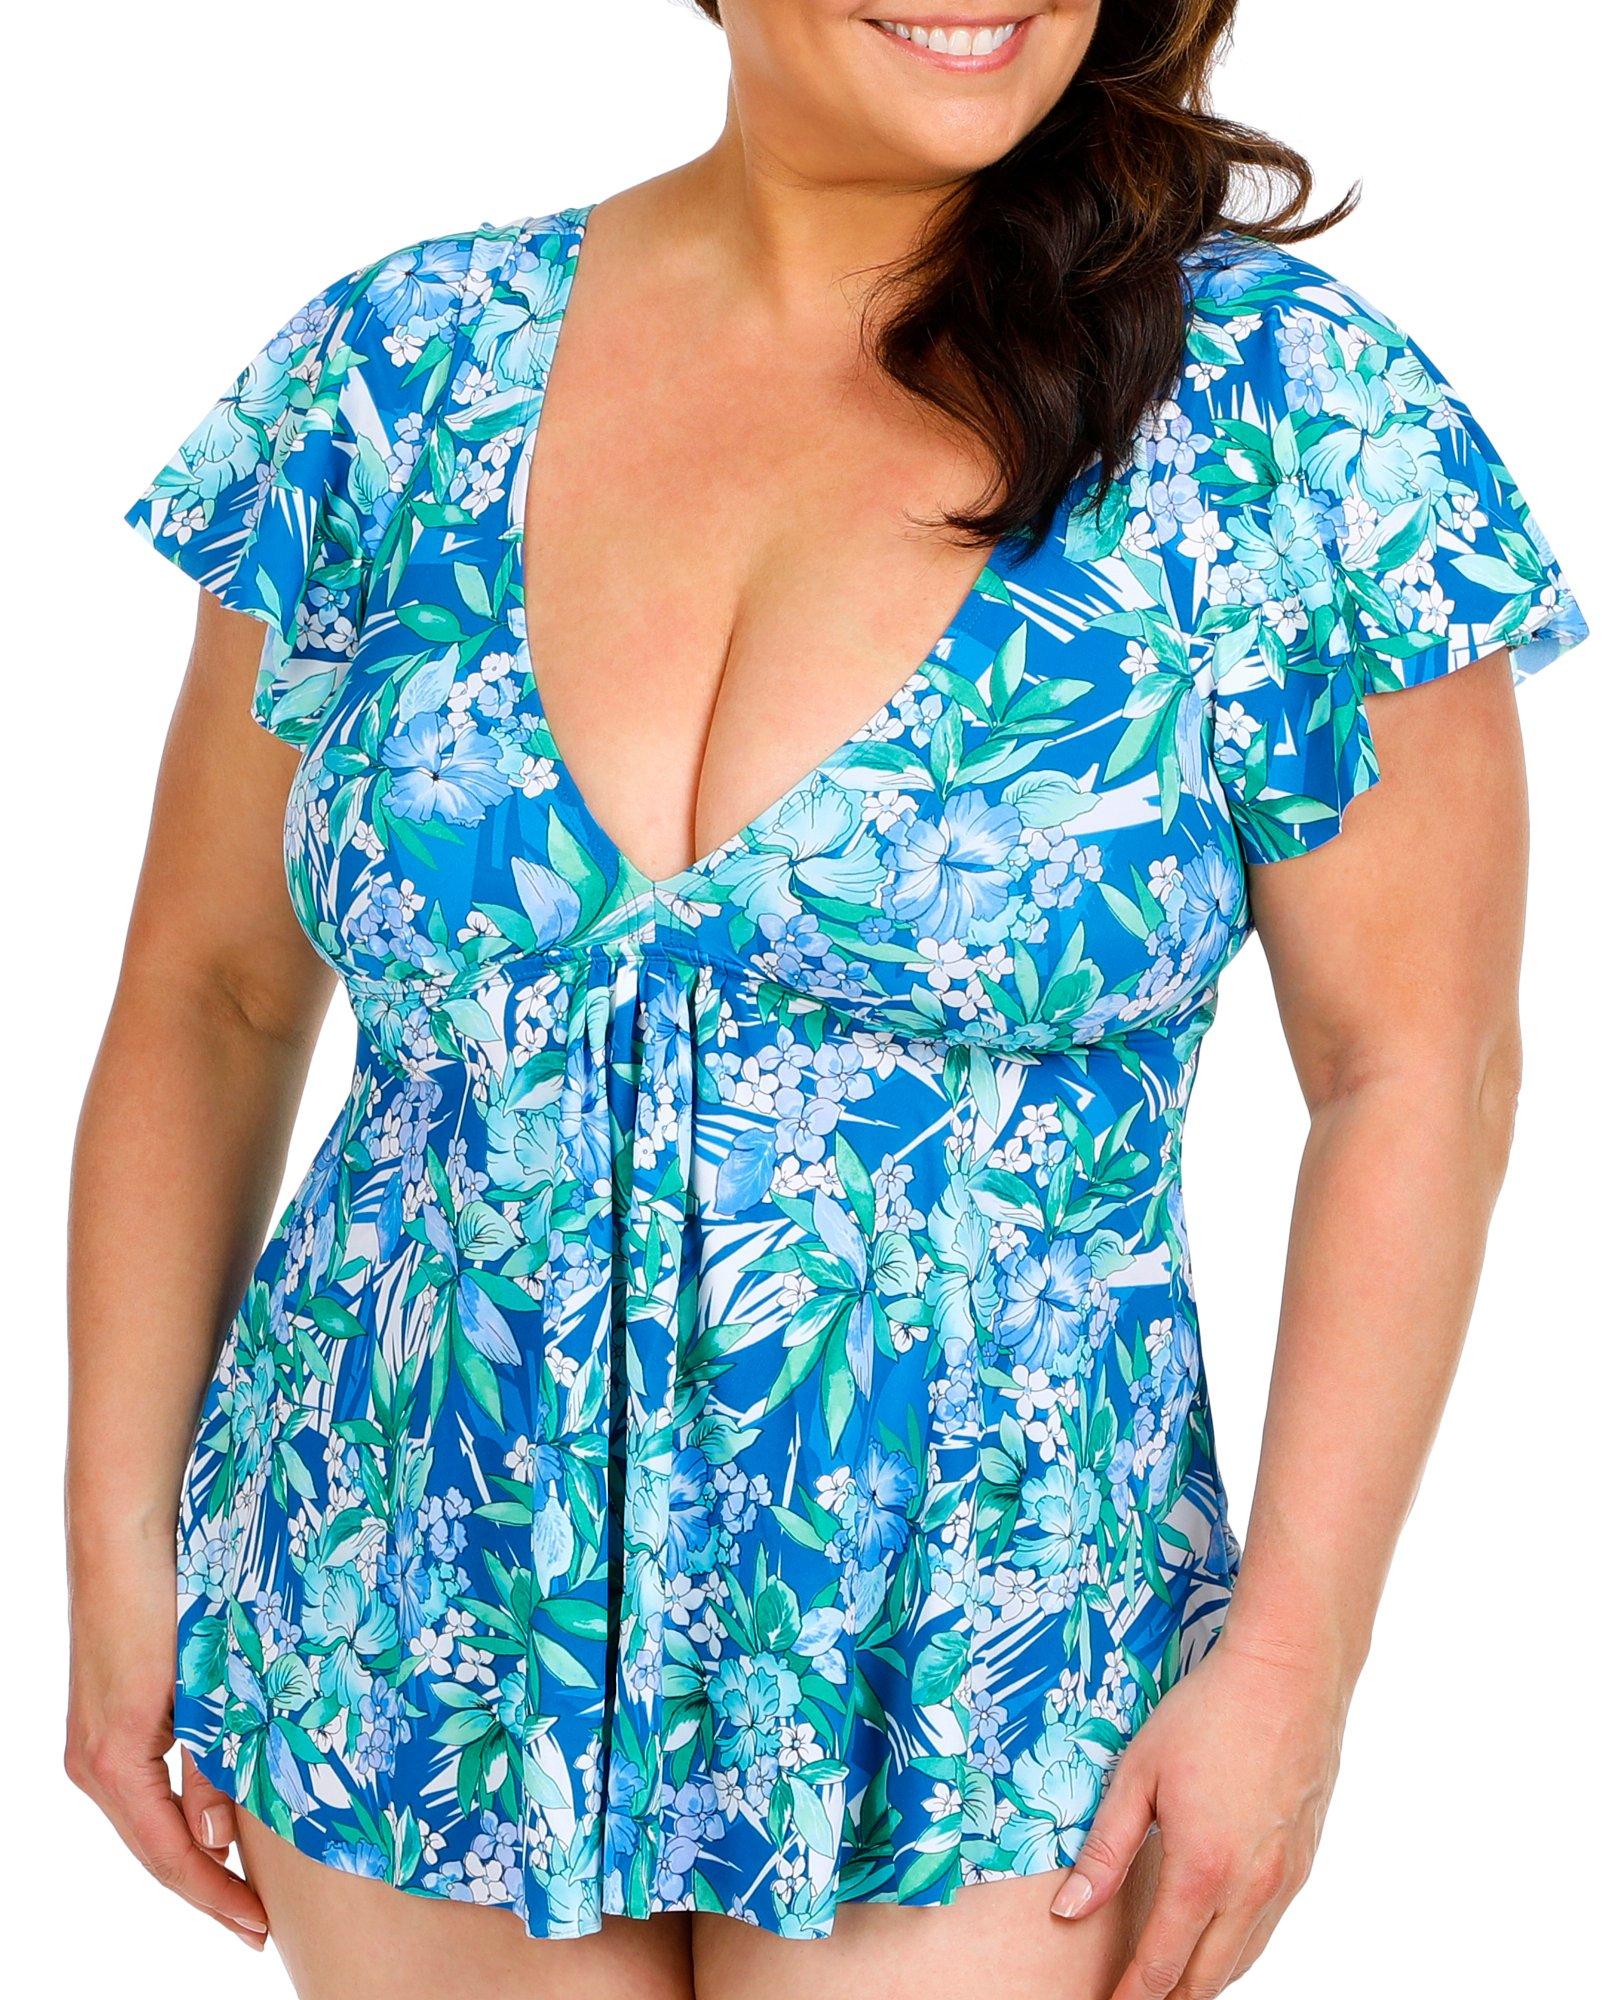 A Shore Fit Womens Floral Short Sleeve Tankini